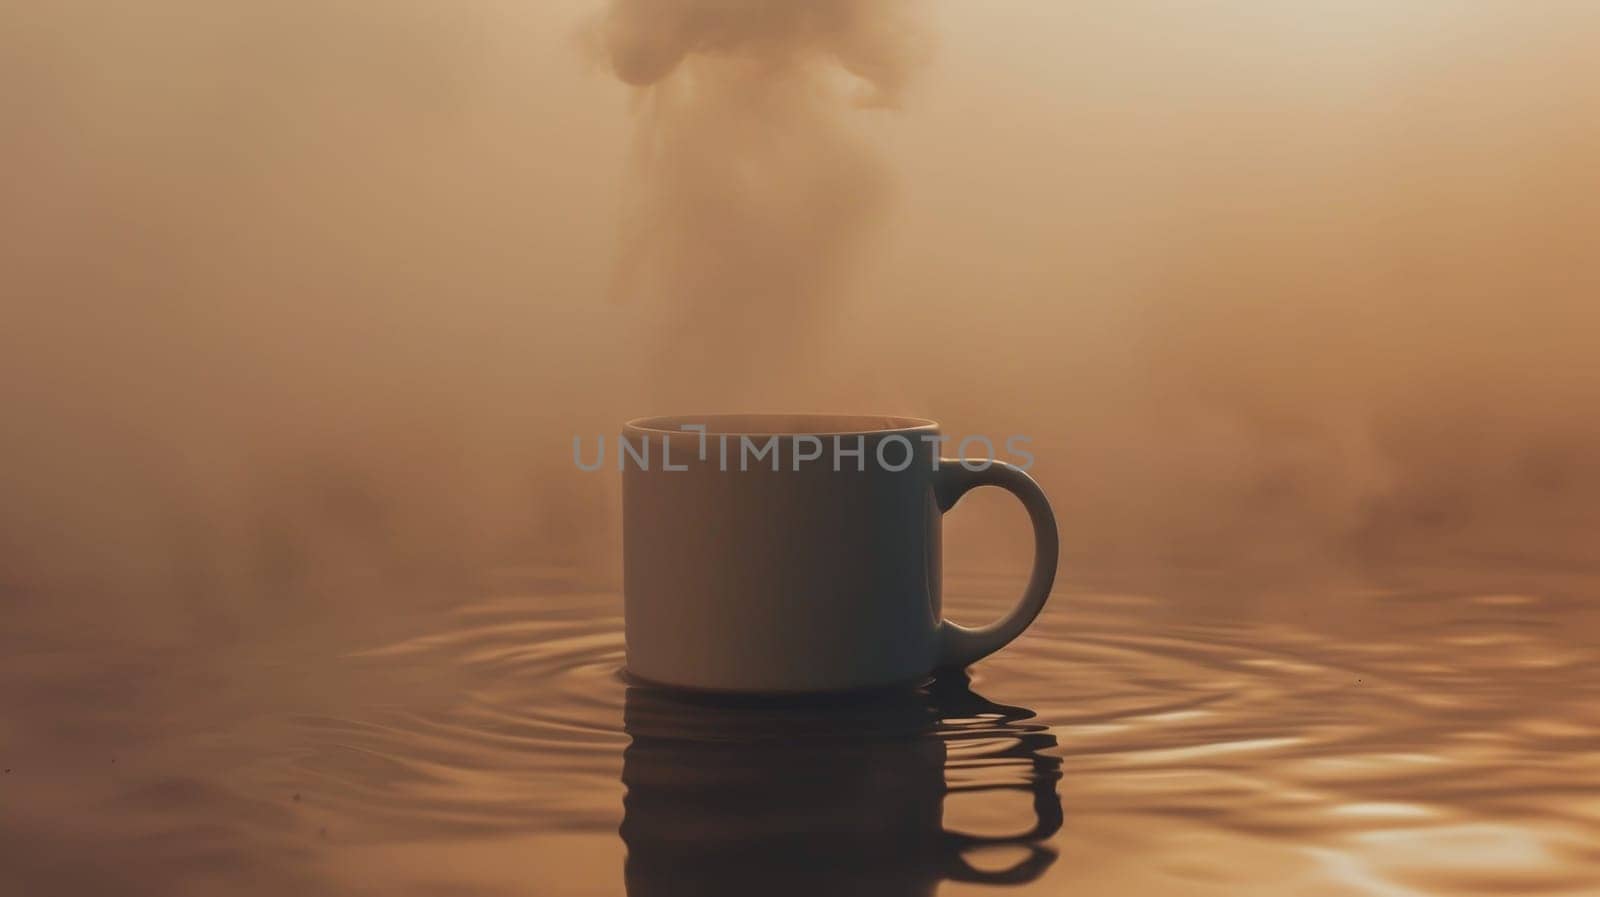 A coffee mug steaming and floating in nowhere, Mockup cup of coffee.